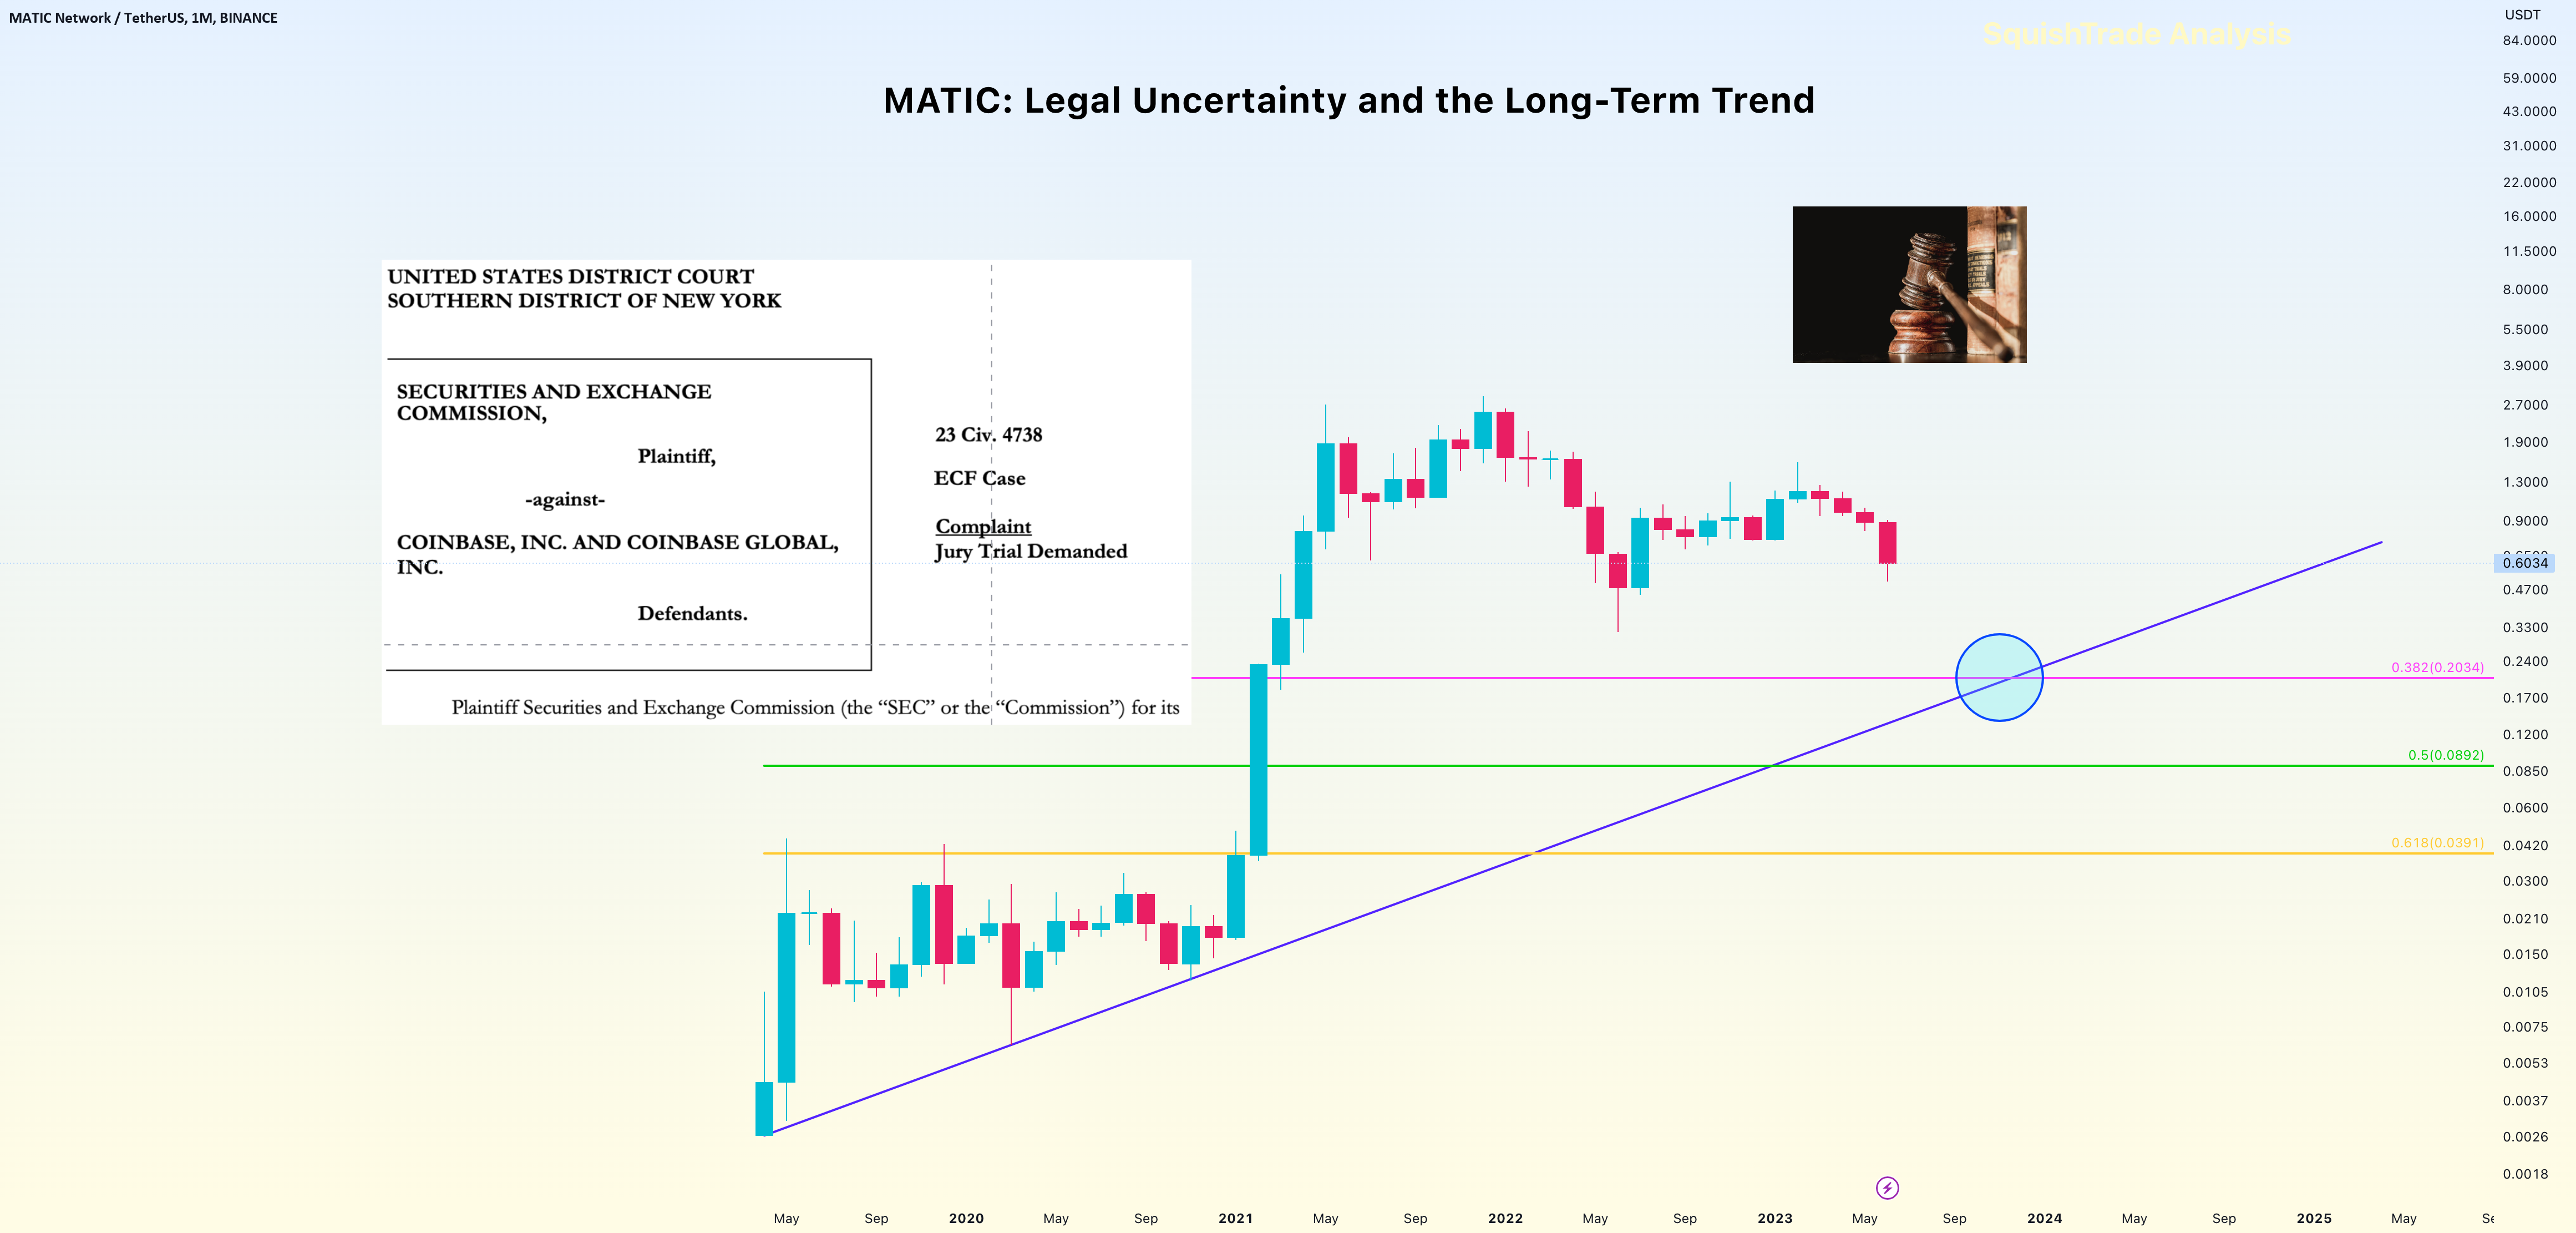 webnexttech | MATIC: Major Lawsuits And The Long-Term Trend For BINANCE:MATICUSDT By SquishTrade - WorldNewsEra